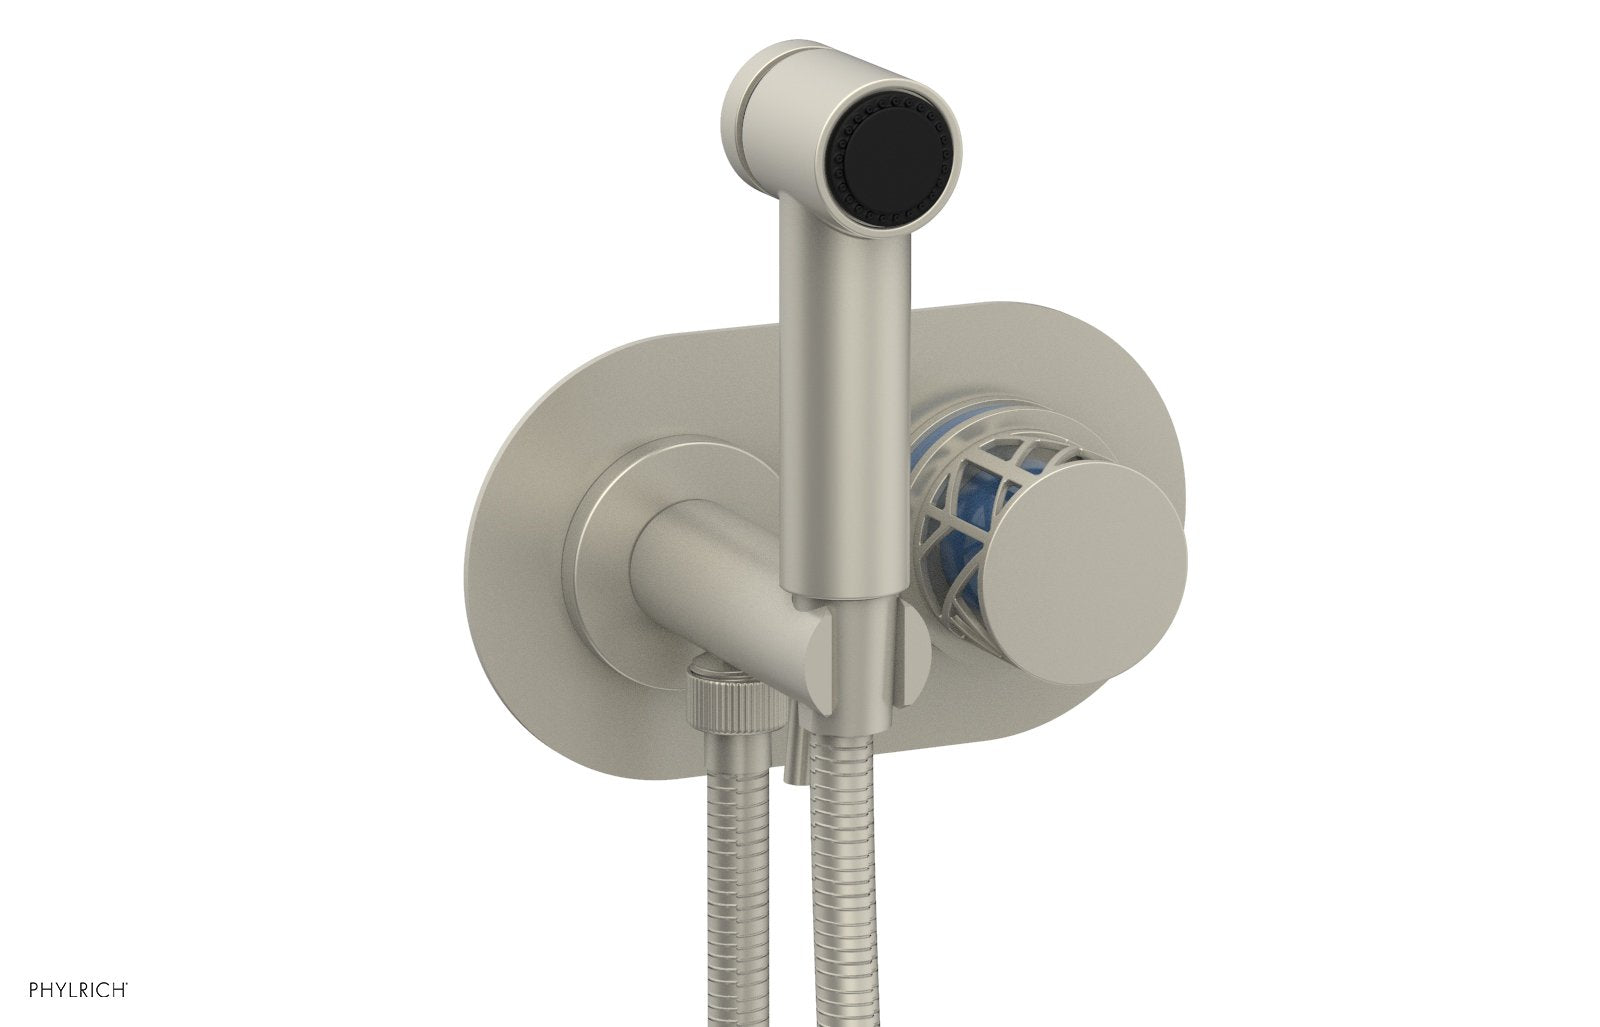 Phylrich JOLIE Wall Mounted Bidet, Round Handle with "Light Blue" Accents